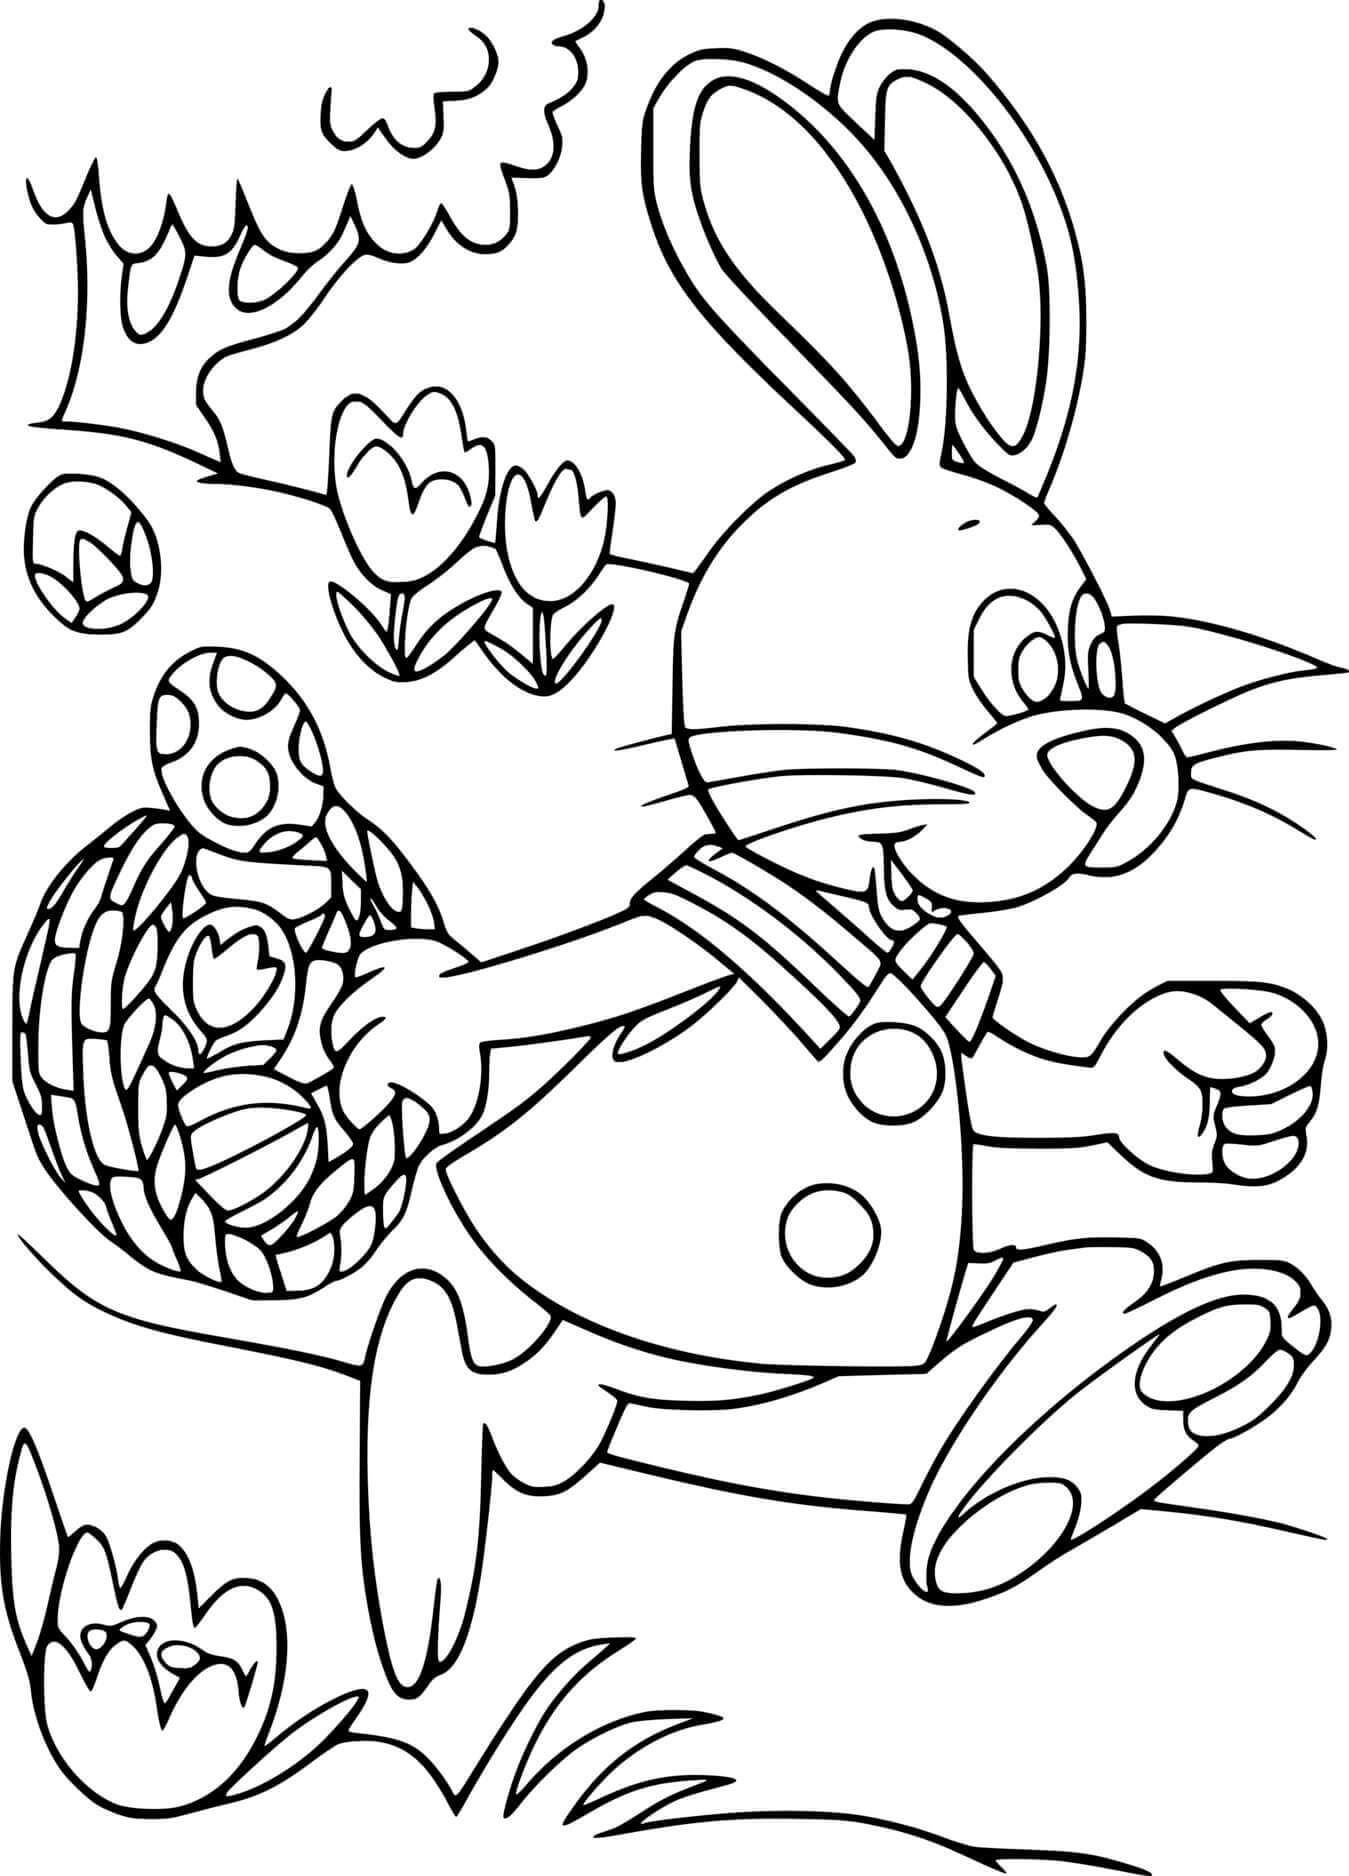 Easter Bunny Running On The Grass Coloring Page